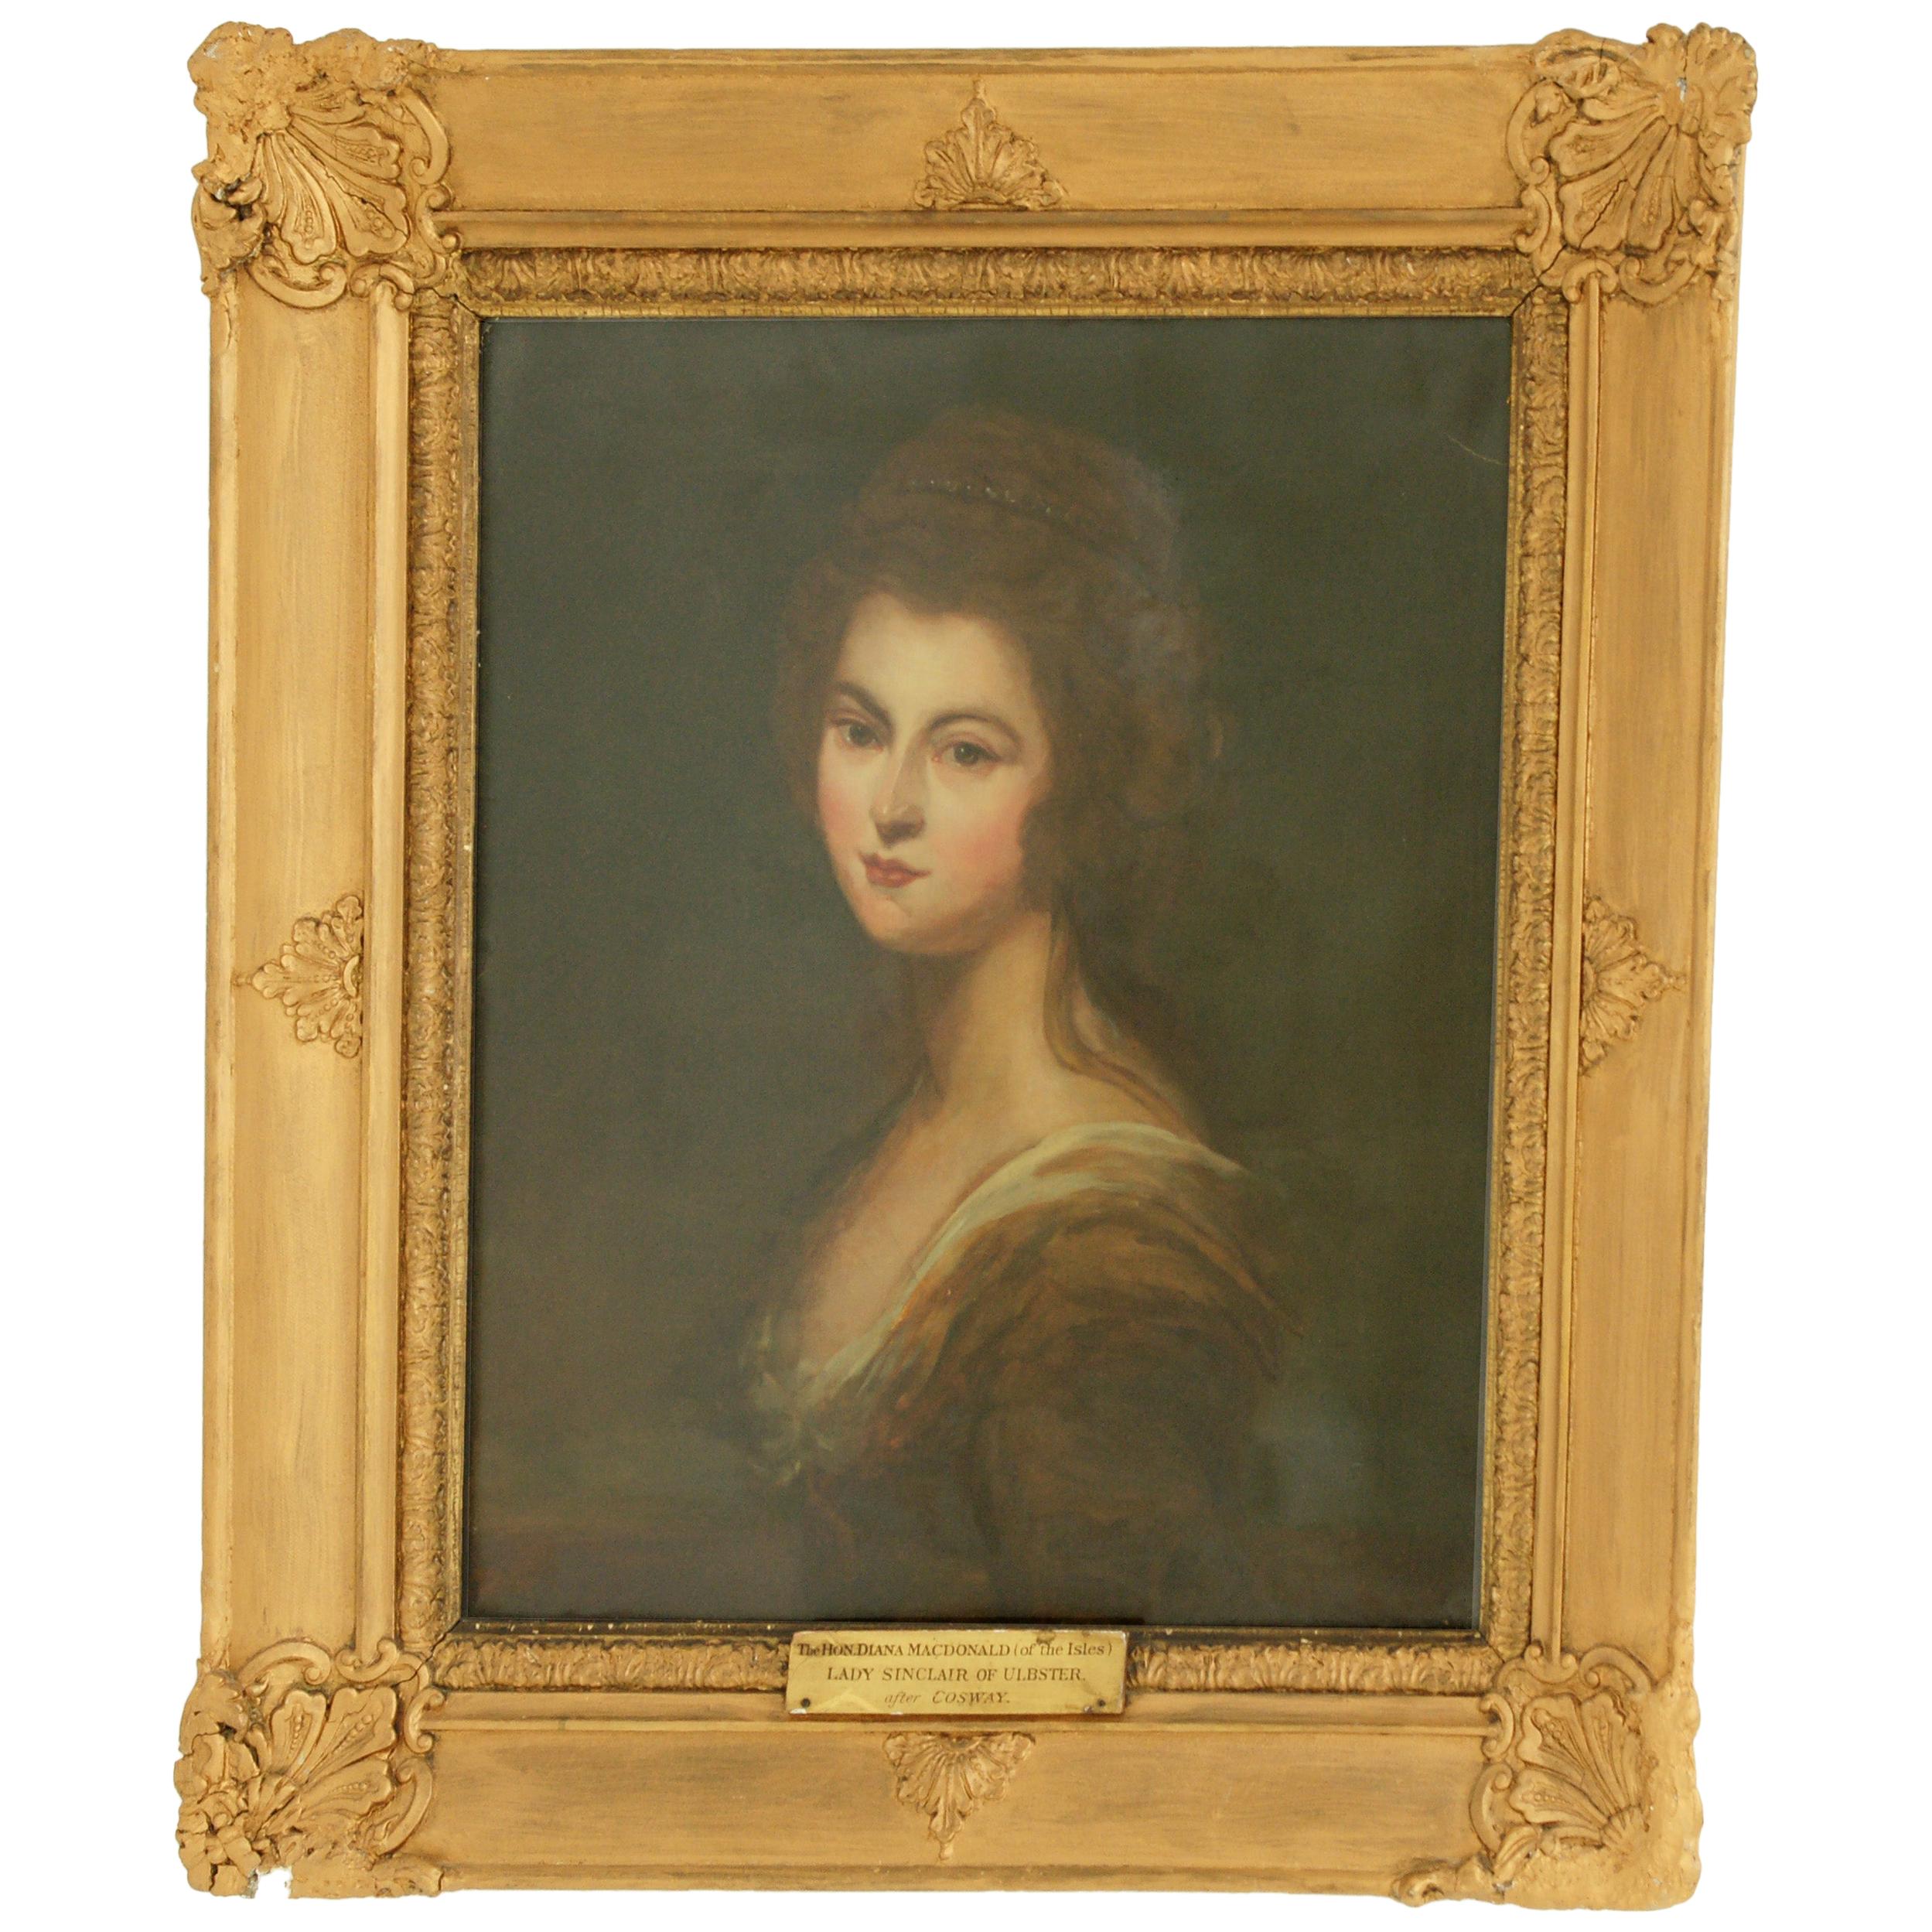 Antique Oil Painting, Diana McDonald, after Cosway, English School, 1880